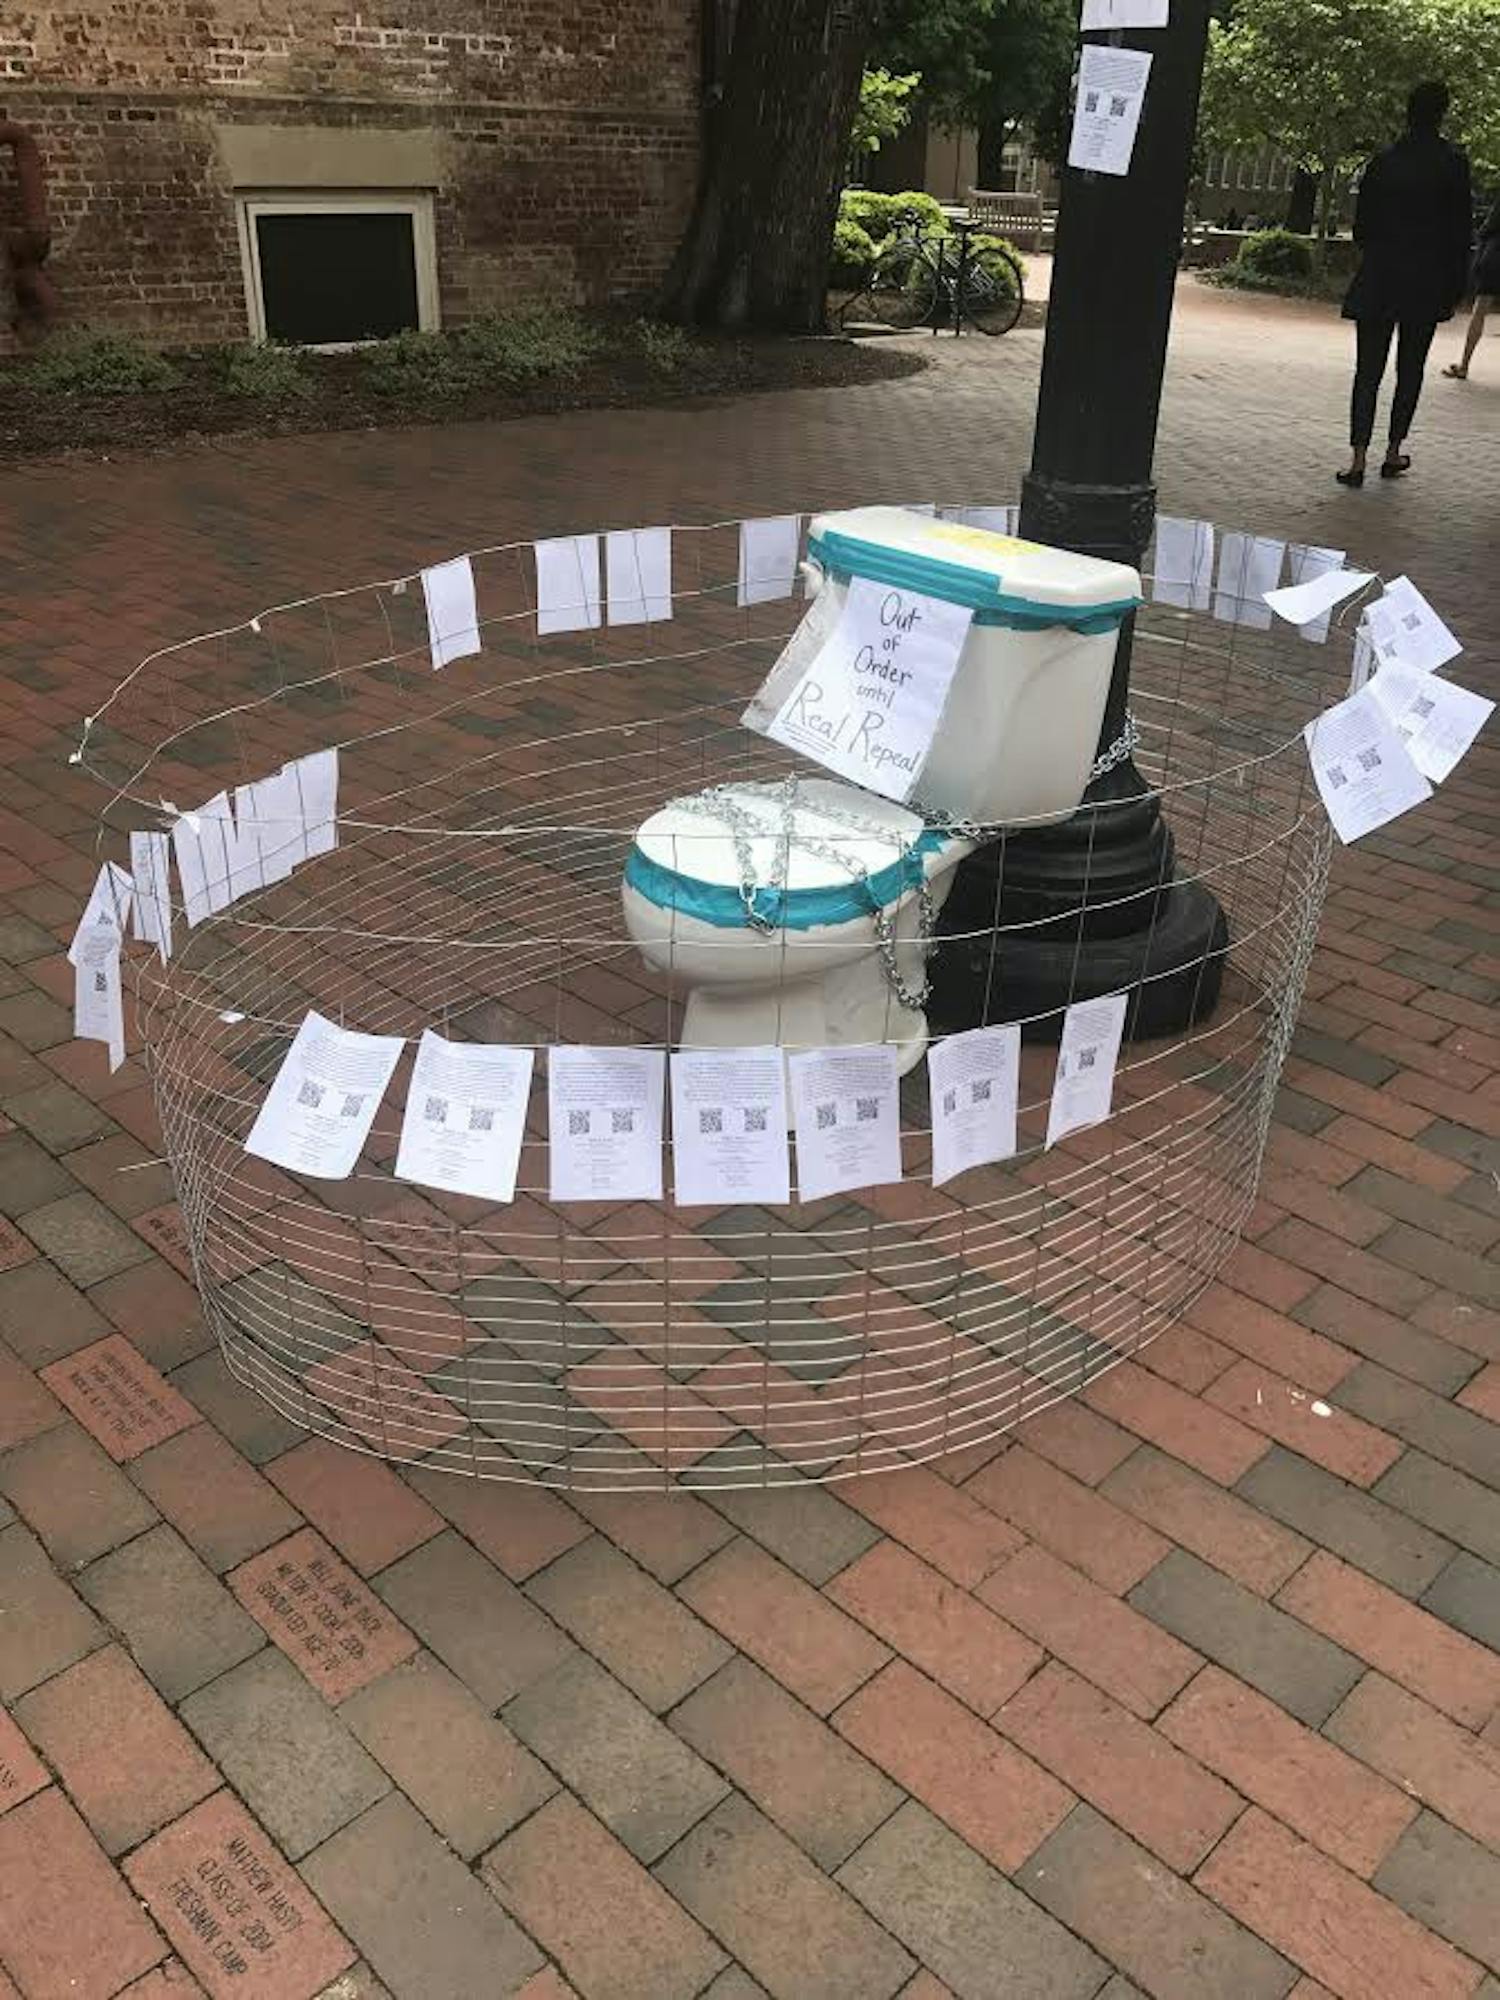 Senior Grace Thorpe's art piece "HBToilet" has disappeared from its place in front of the Campus Y.